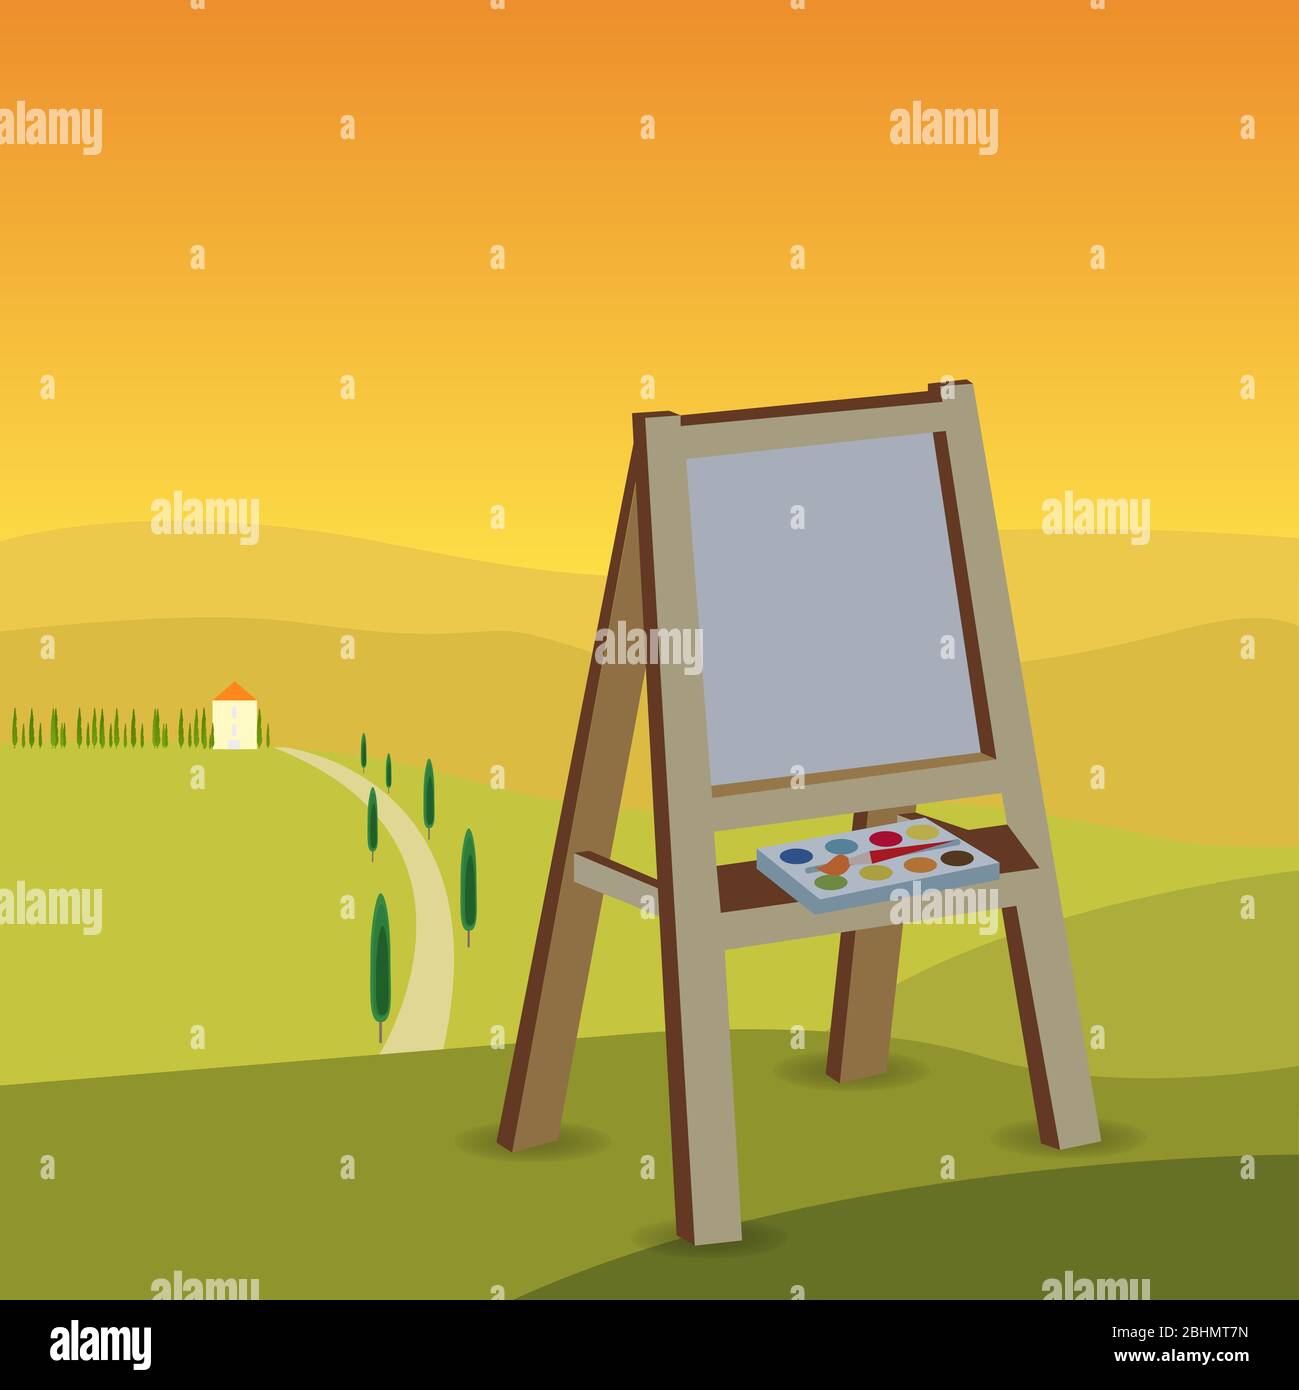 Painting Board Icon Stock Illustrations – 6,054 Painting Board